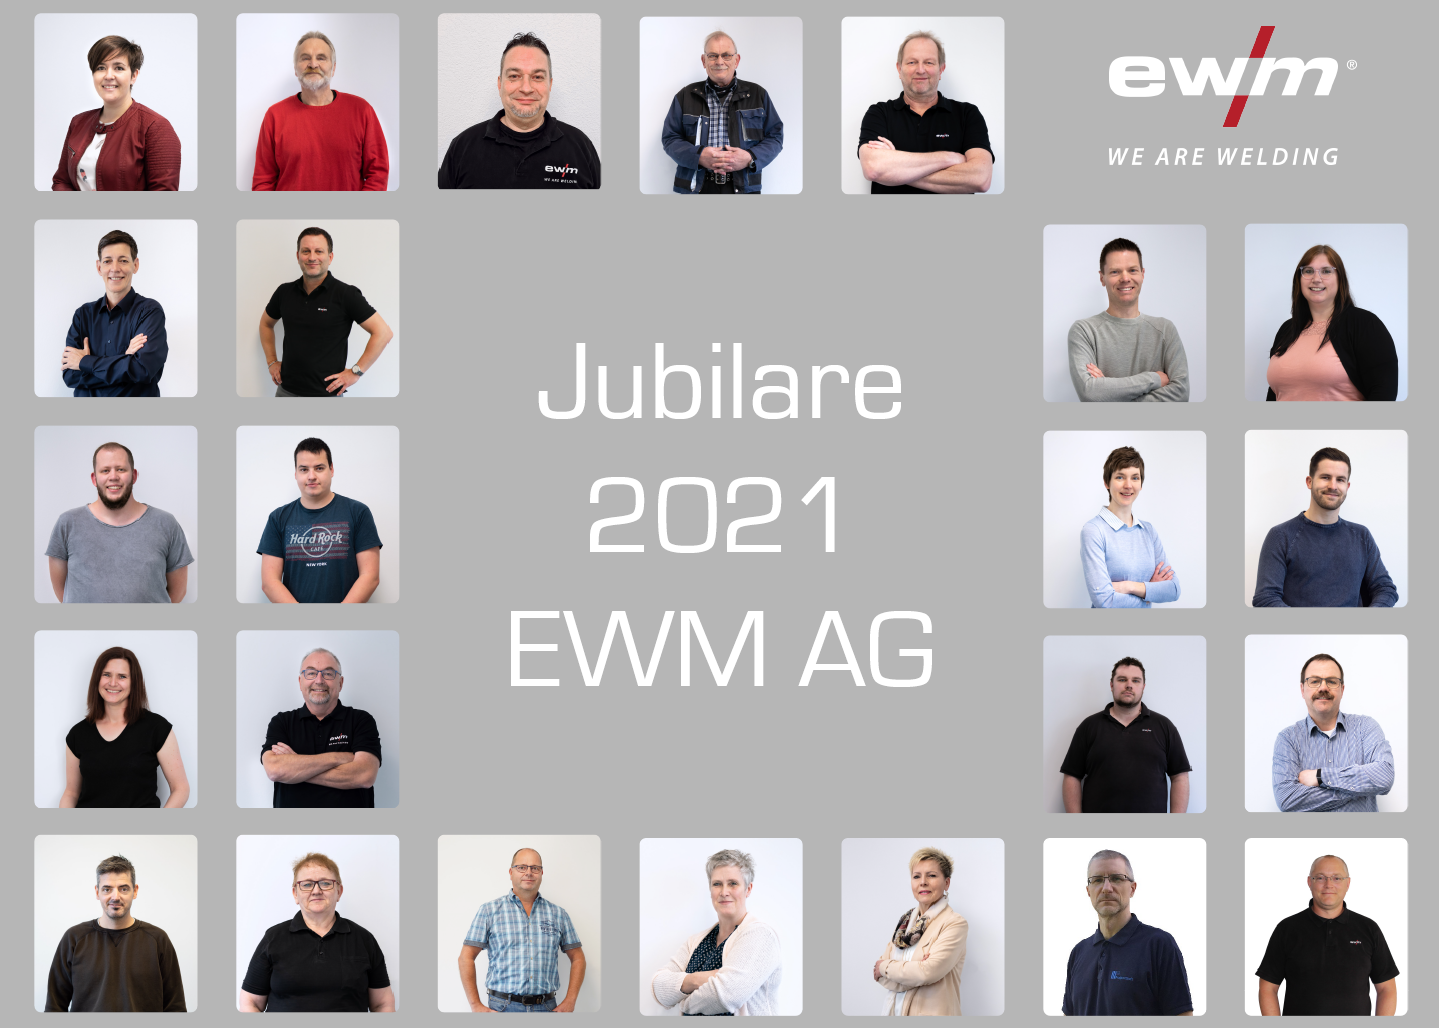 We are celebrating our long-standing anniversaries and loyal EWM family members